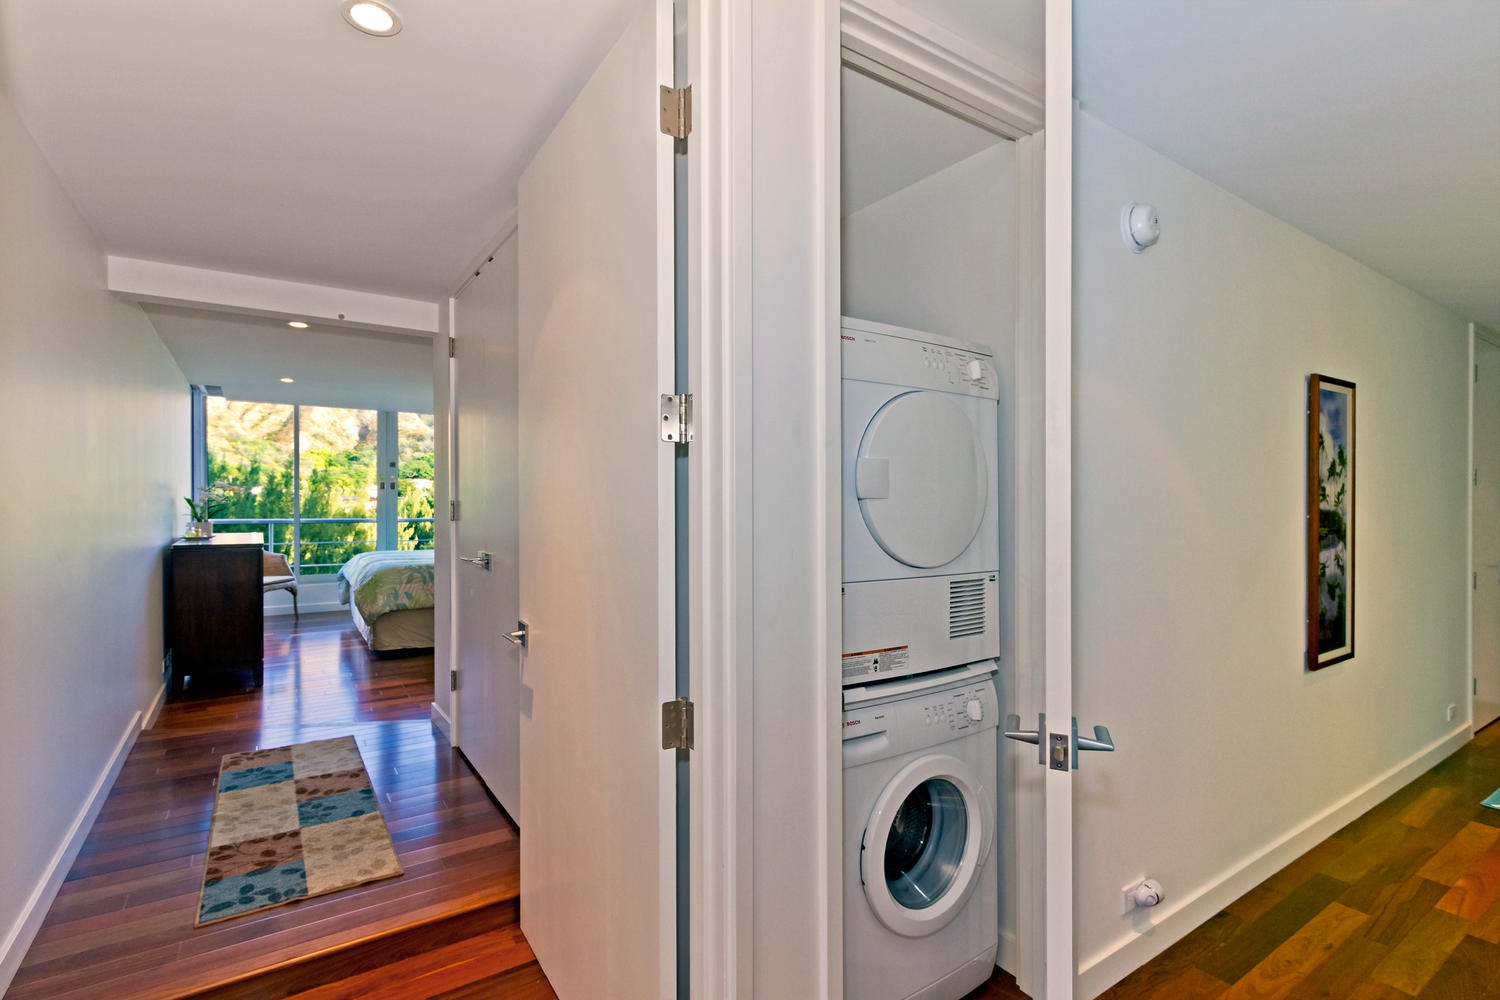 Honolulu Vacation Rentals, Executive Gold Coast Oceanfront Suite - Washer and dryer in the unit.